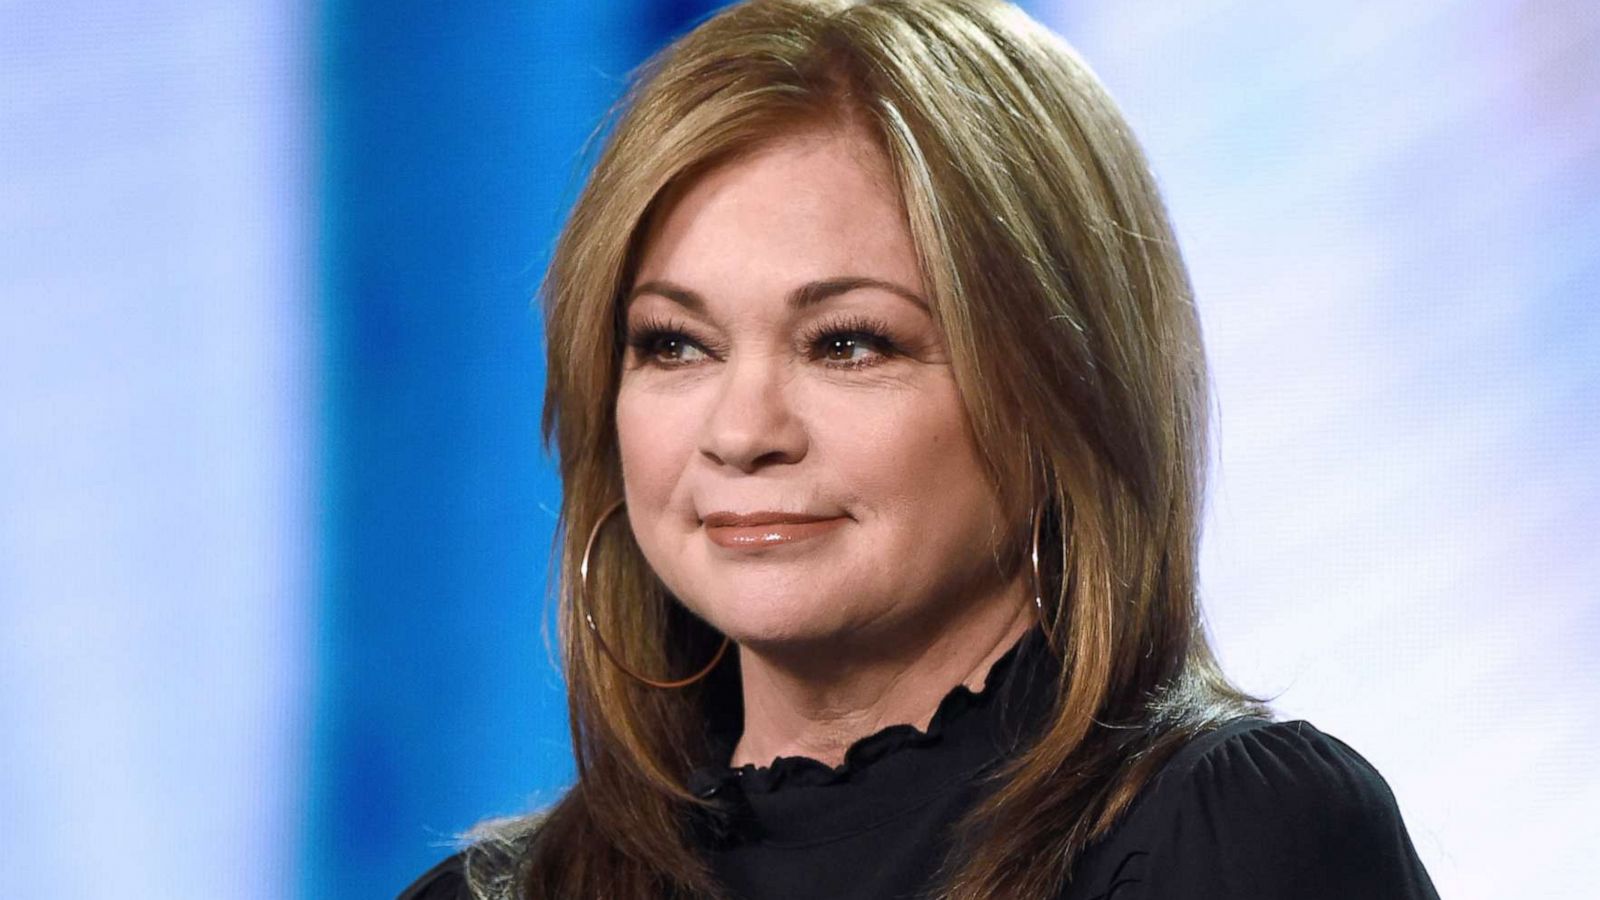 PHOTO: Valerie Bertinelli appears at an event on Feb. 12, 2019, in Pasadena, Calif.